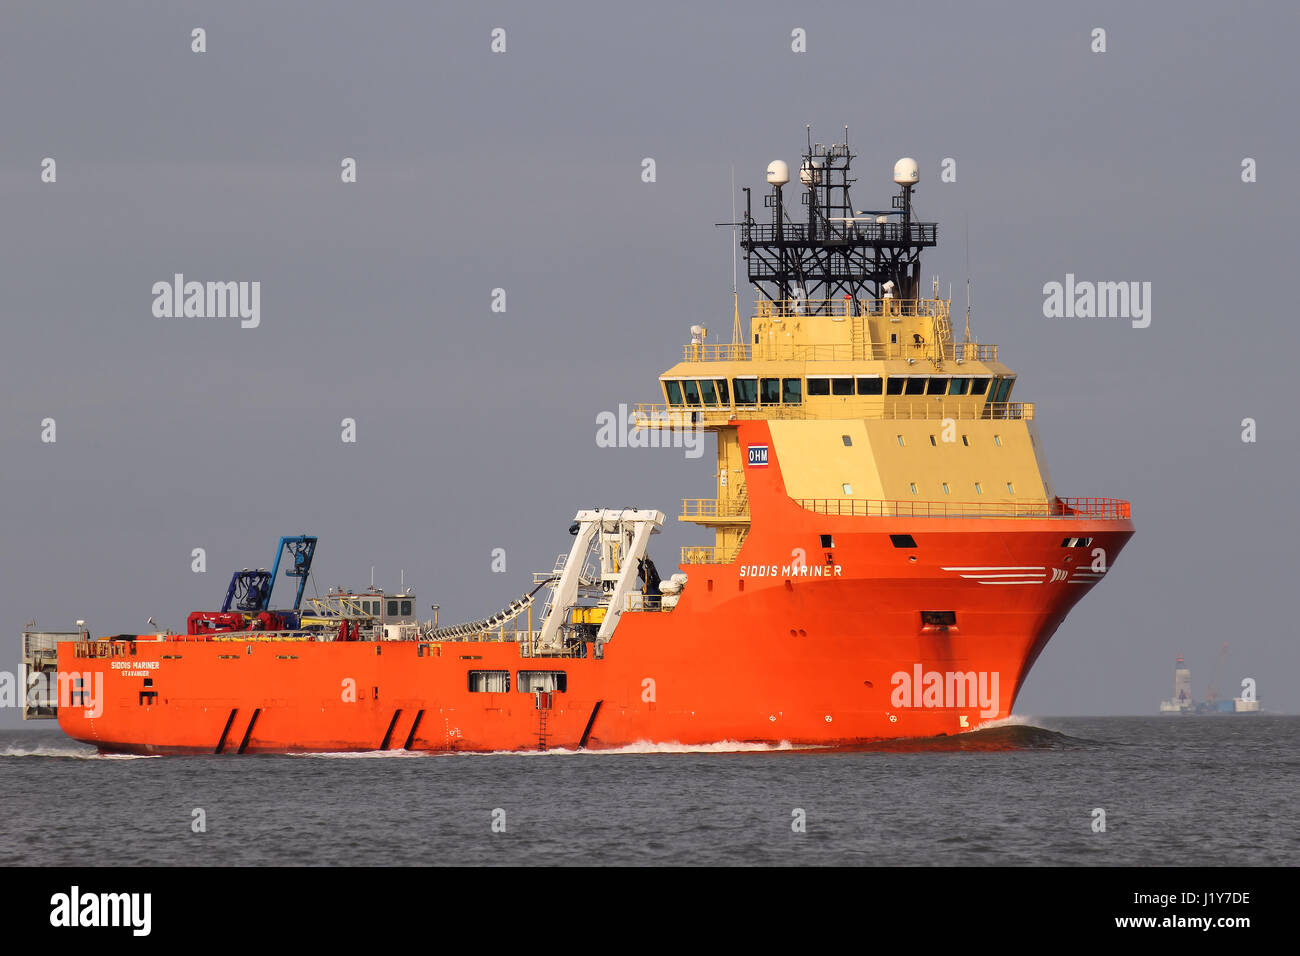 SIDDIS MARINER on the river Elbe. The SIDDIS MARINER is a diesel electric driven supply vessel and pipe carrier, owned and operated by Siem Offshore. Stock Photo